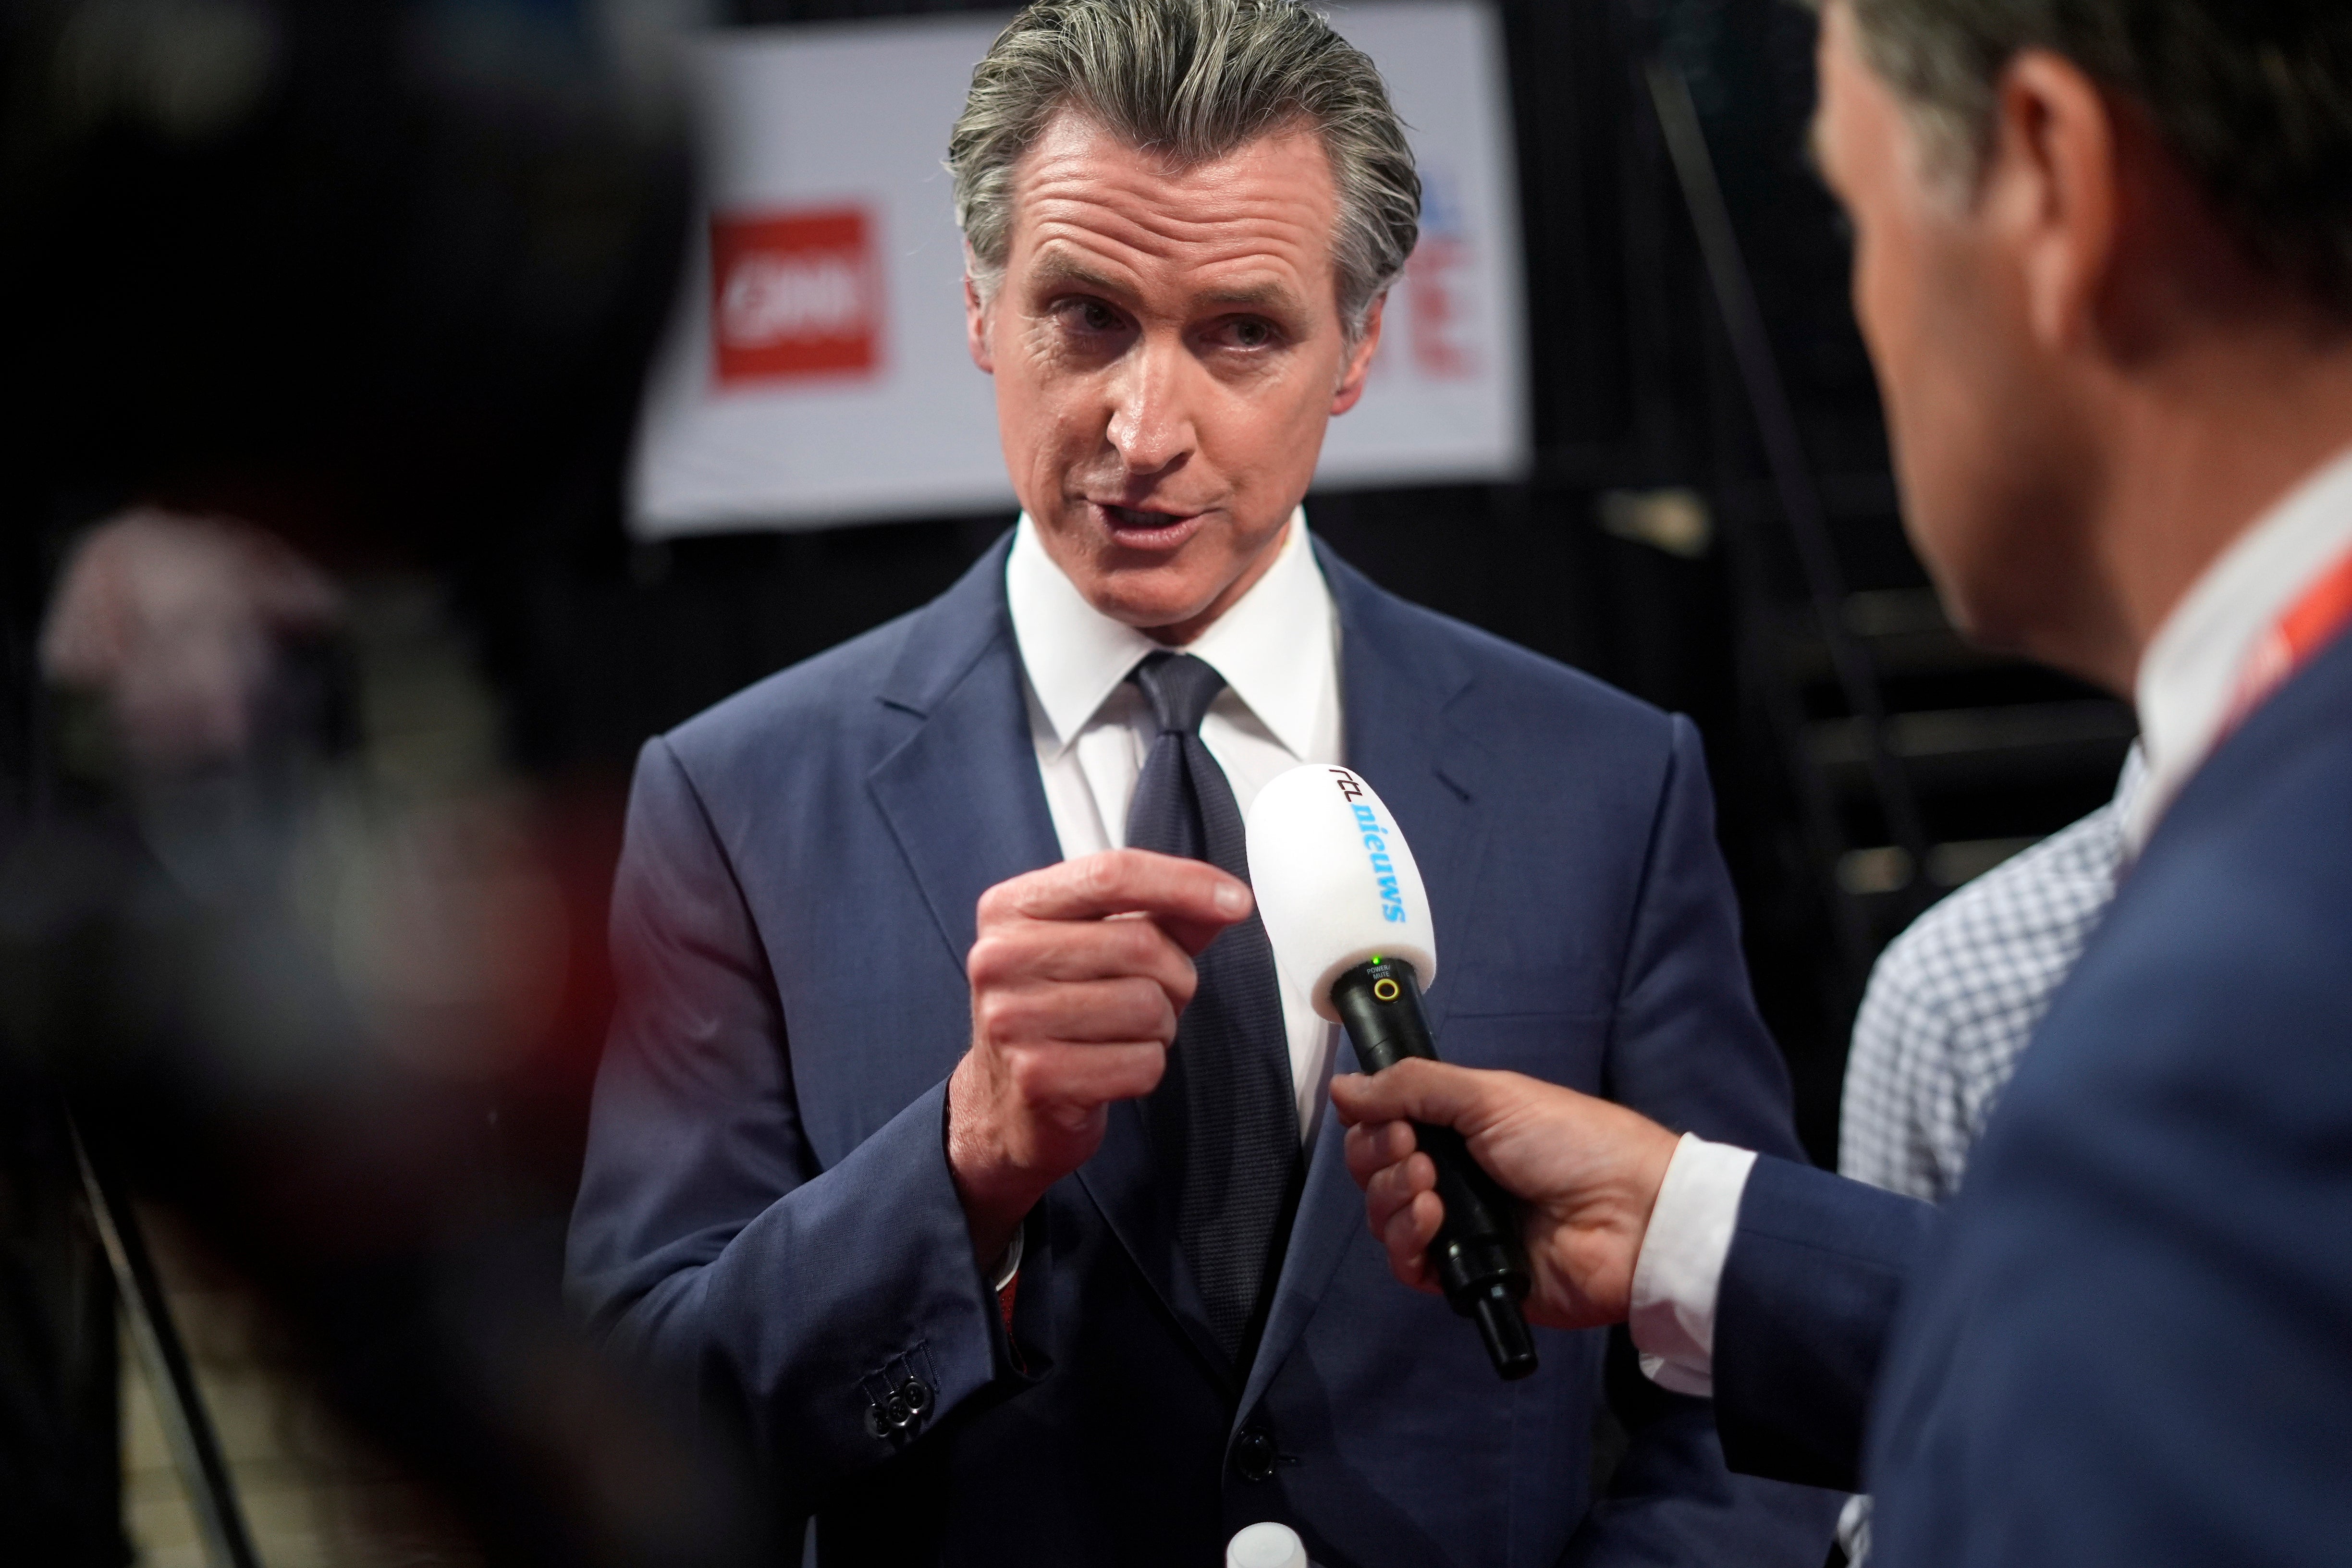 California Governor Gavin Newsom speaks during an interview in the spin room in support of President Joe Biden